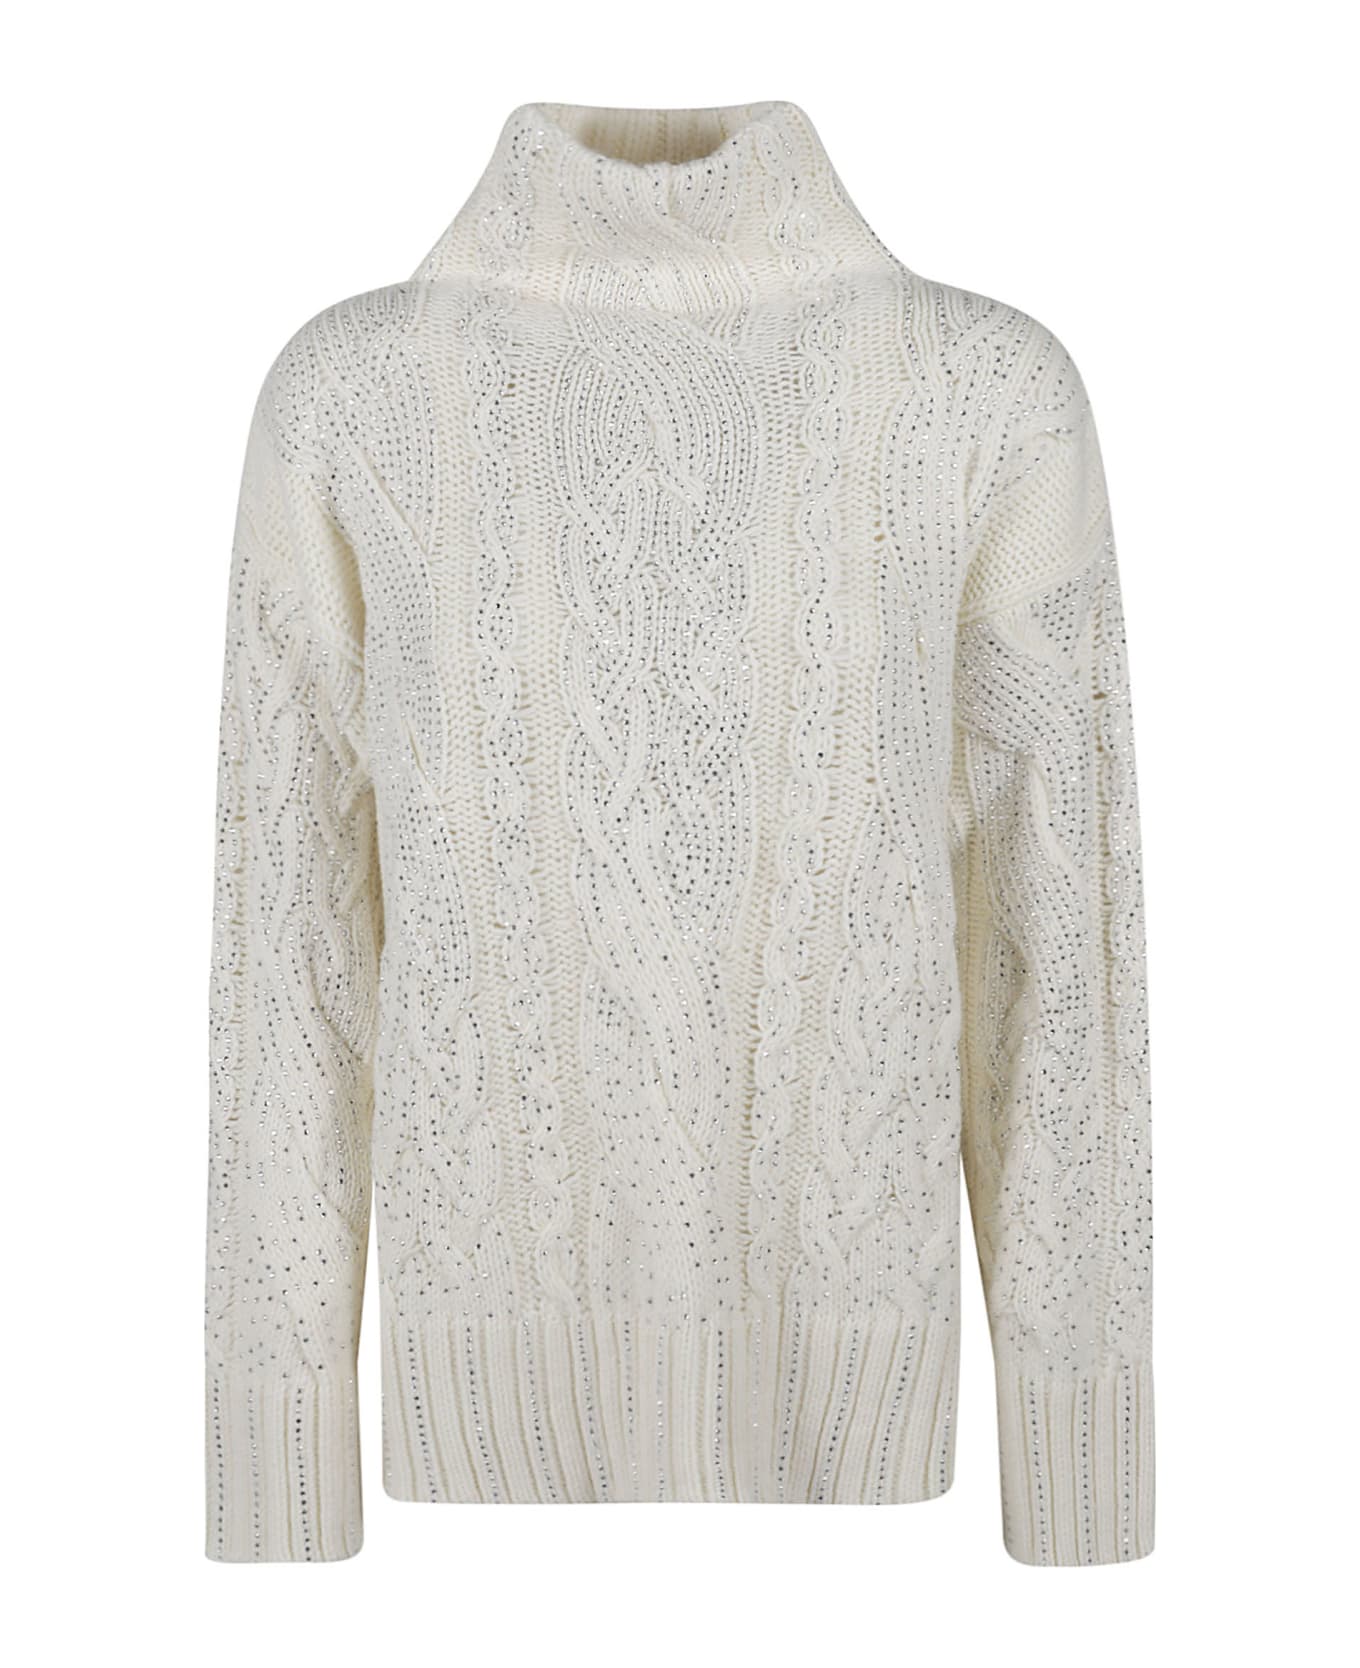 Ermanno Scervino All-over Crystal Sweater - Panna